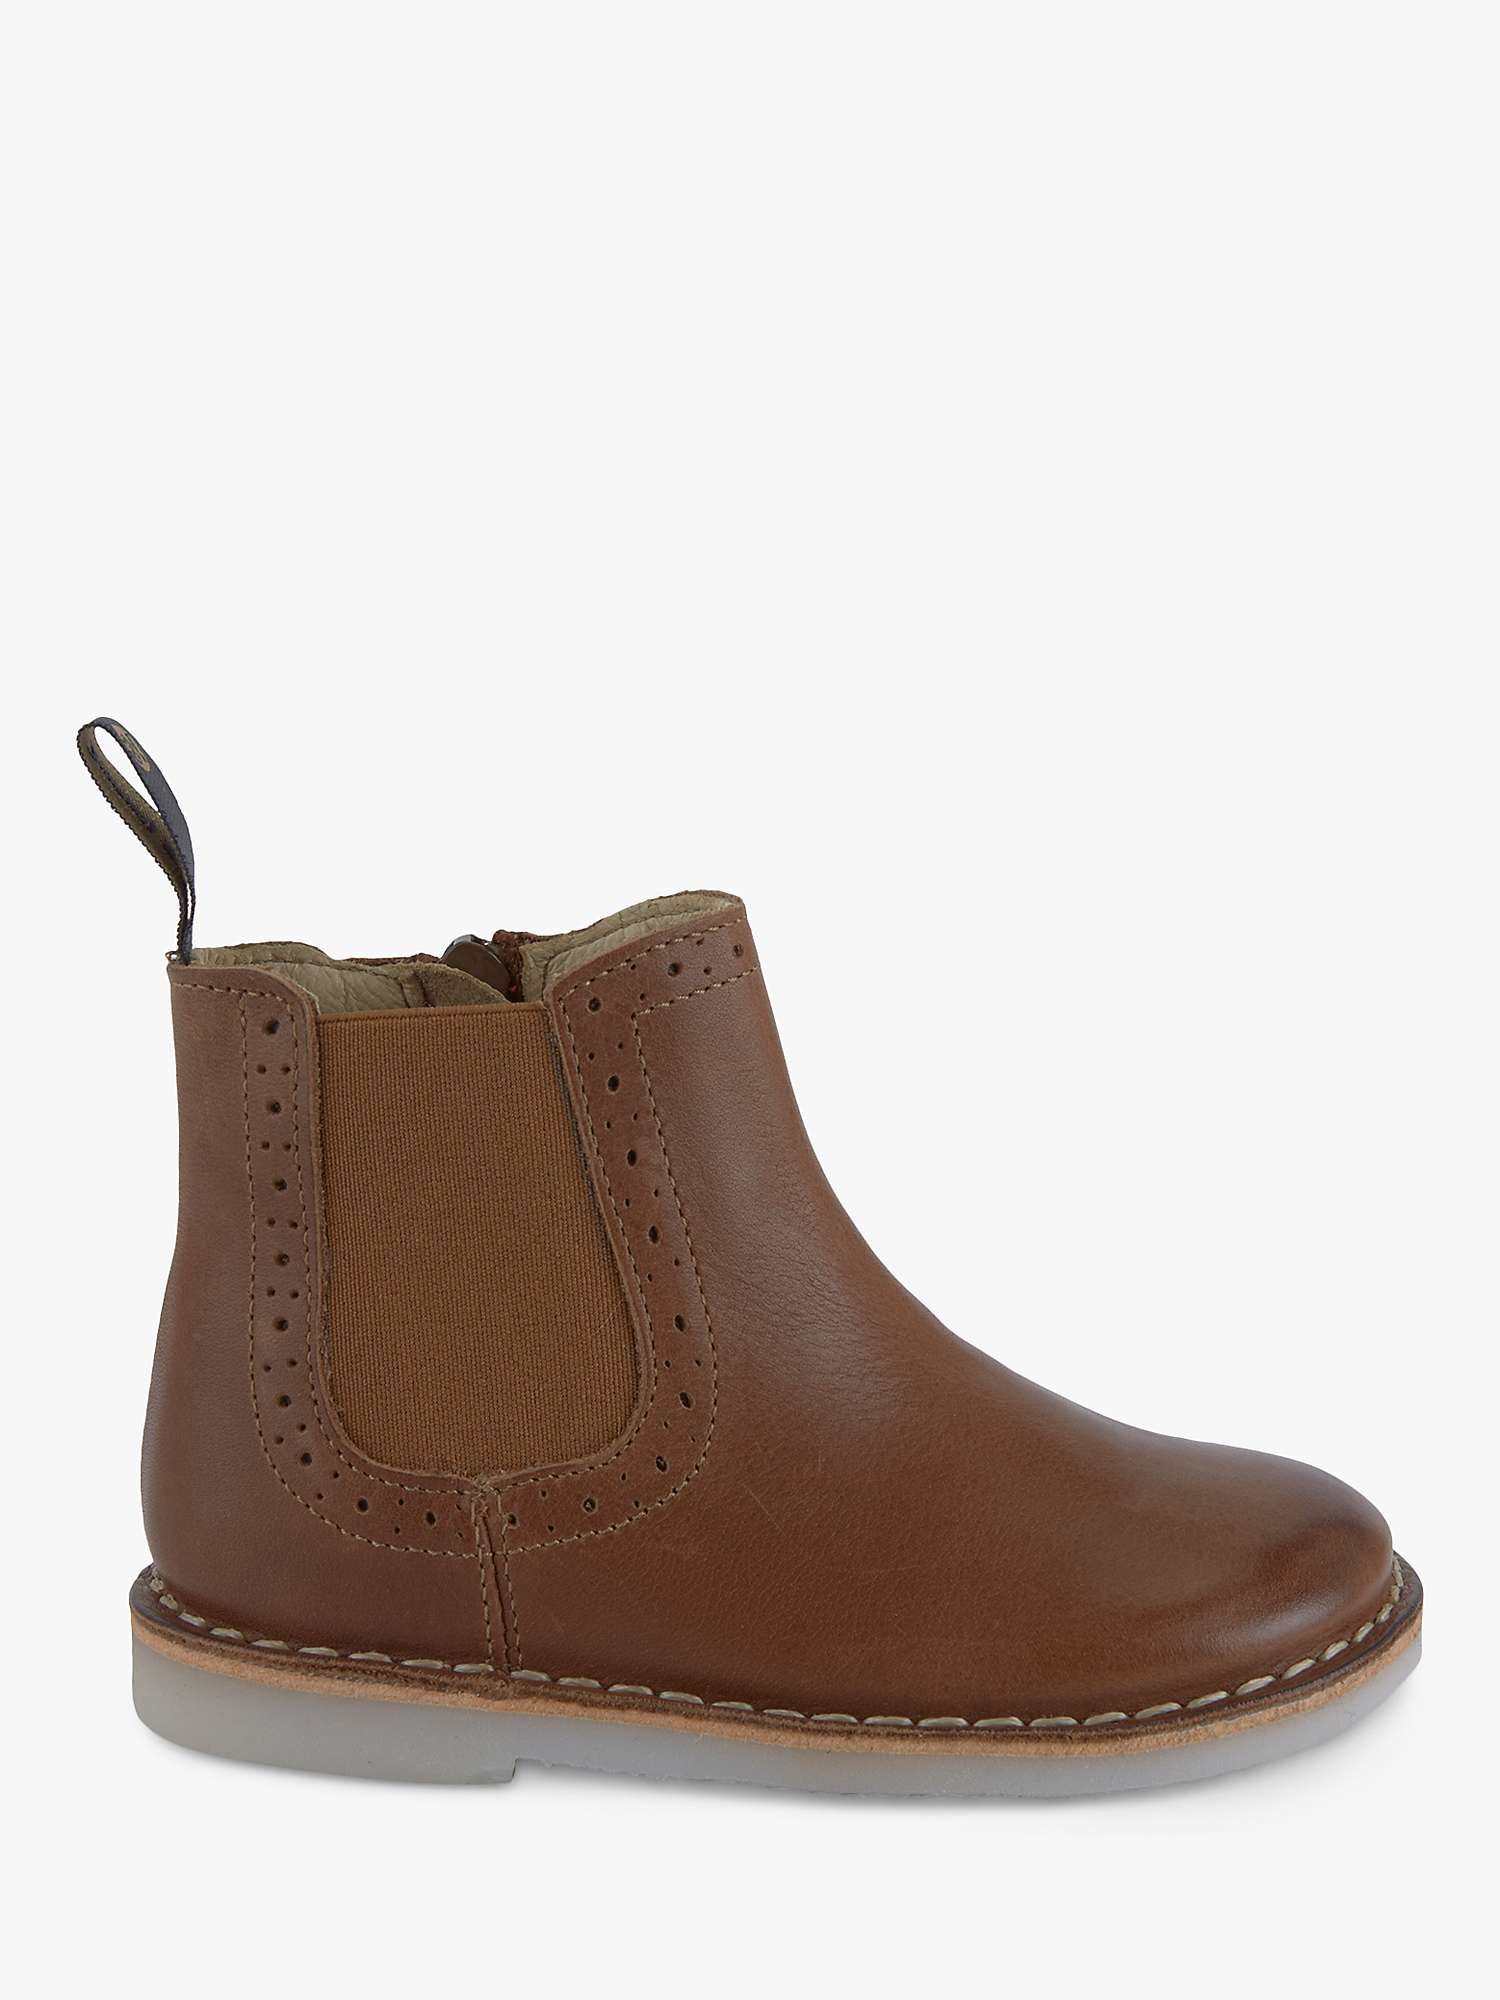 Buy Young Soles Kids' Marlowe Leather Chelsea Boots Online at johnlewis.com